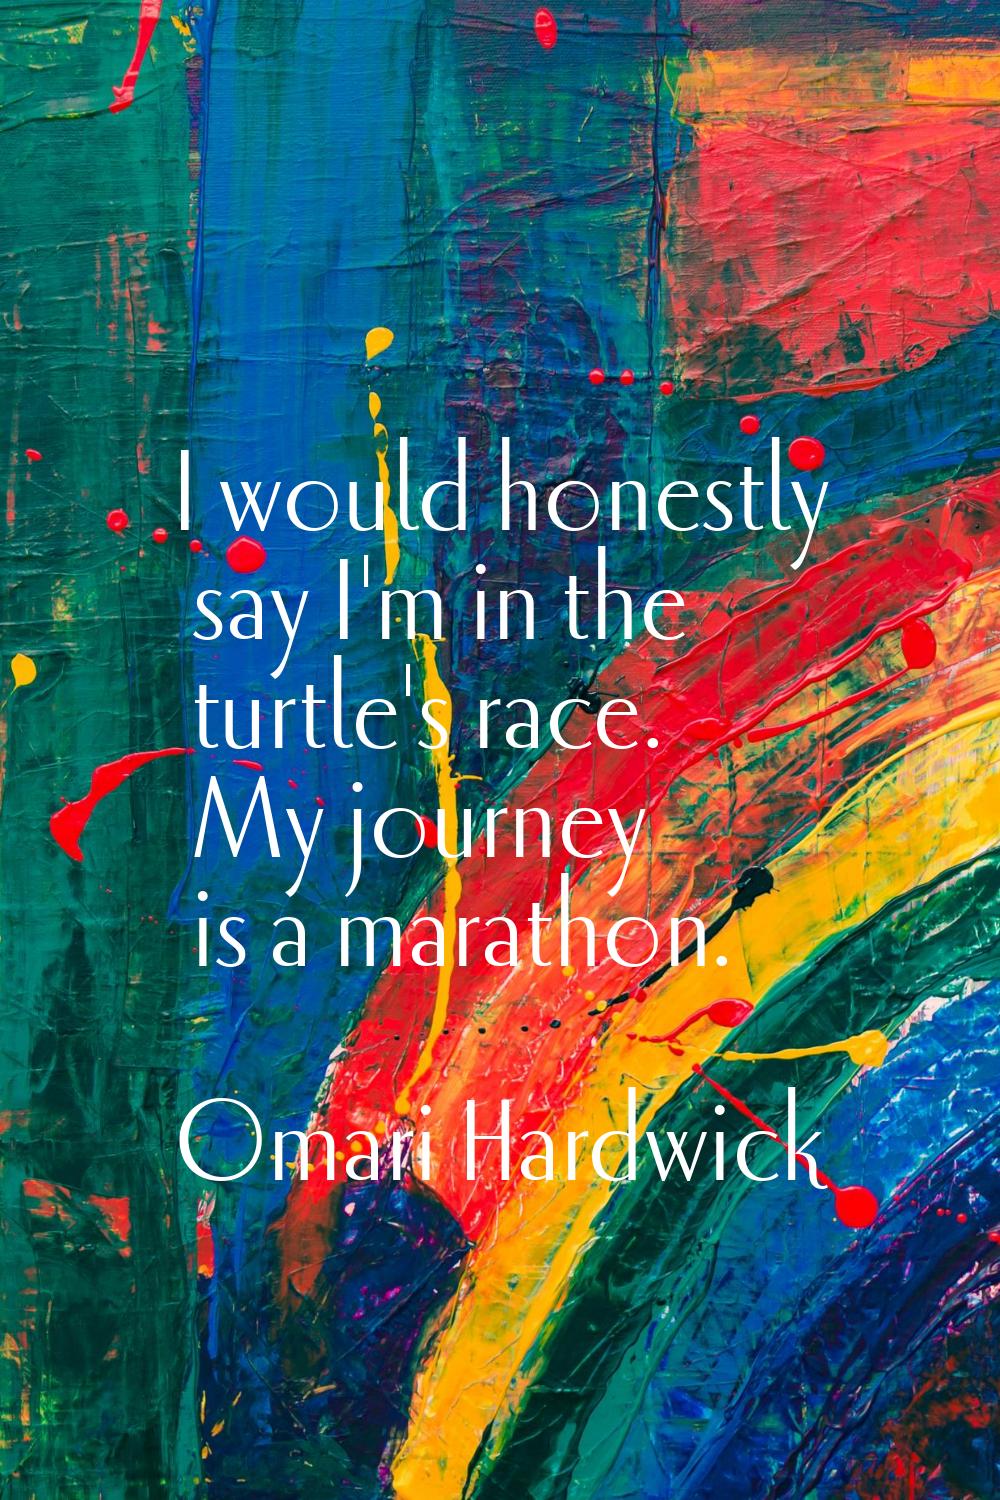 I would honestly say I'm in the turtle's race. My journey is a marathon.